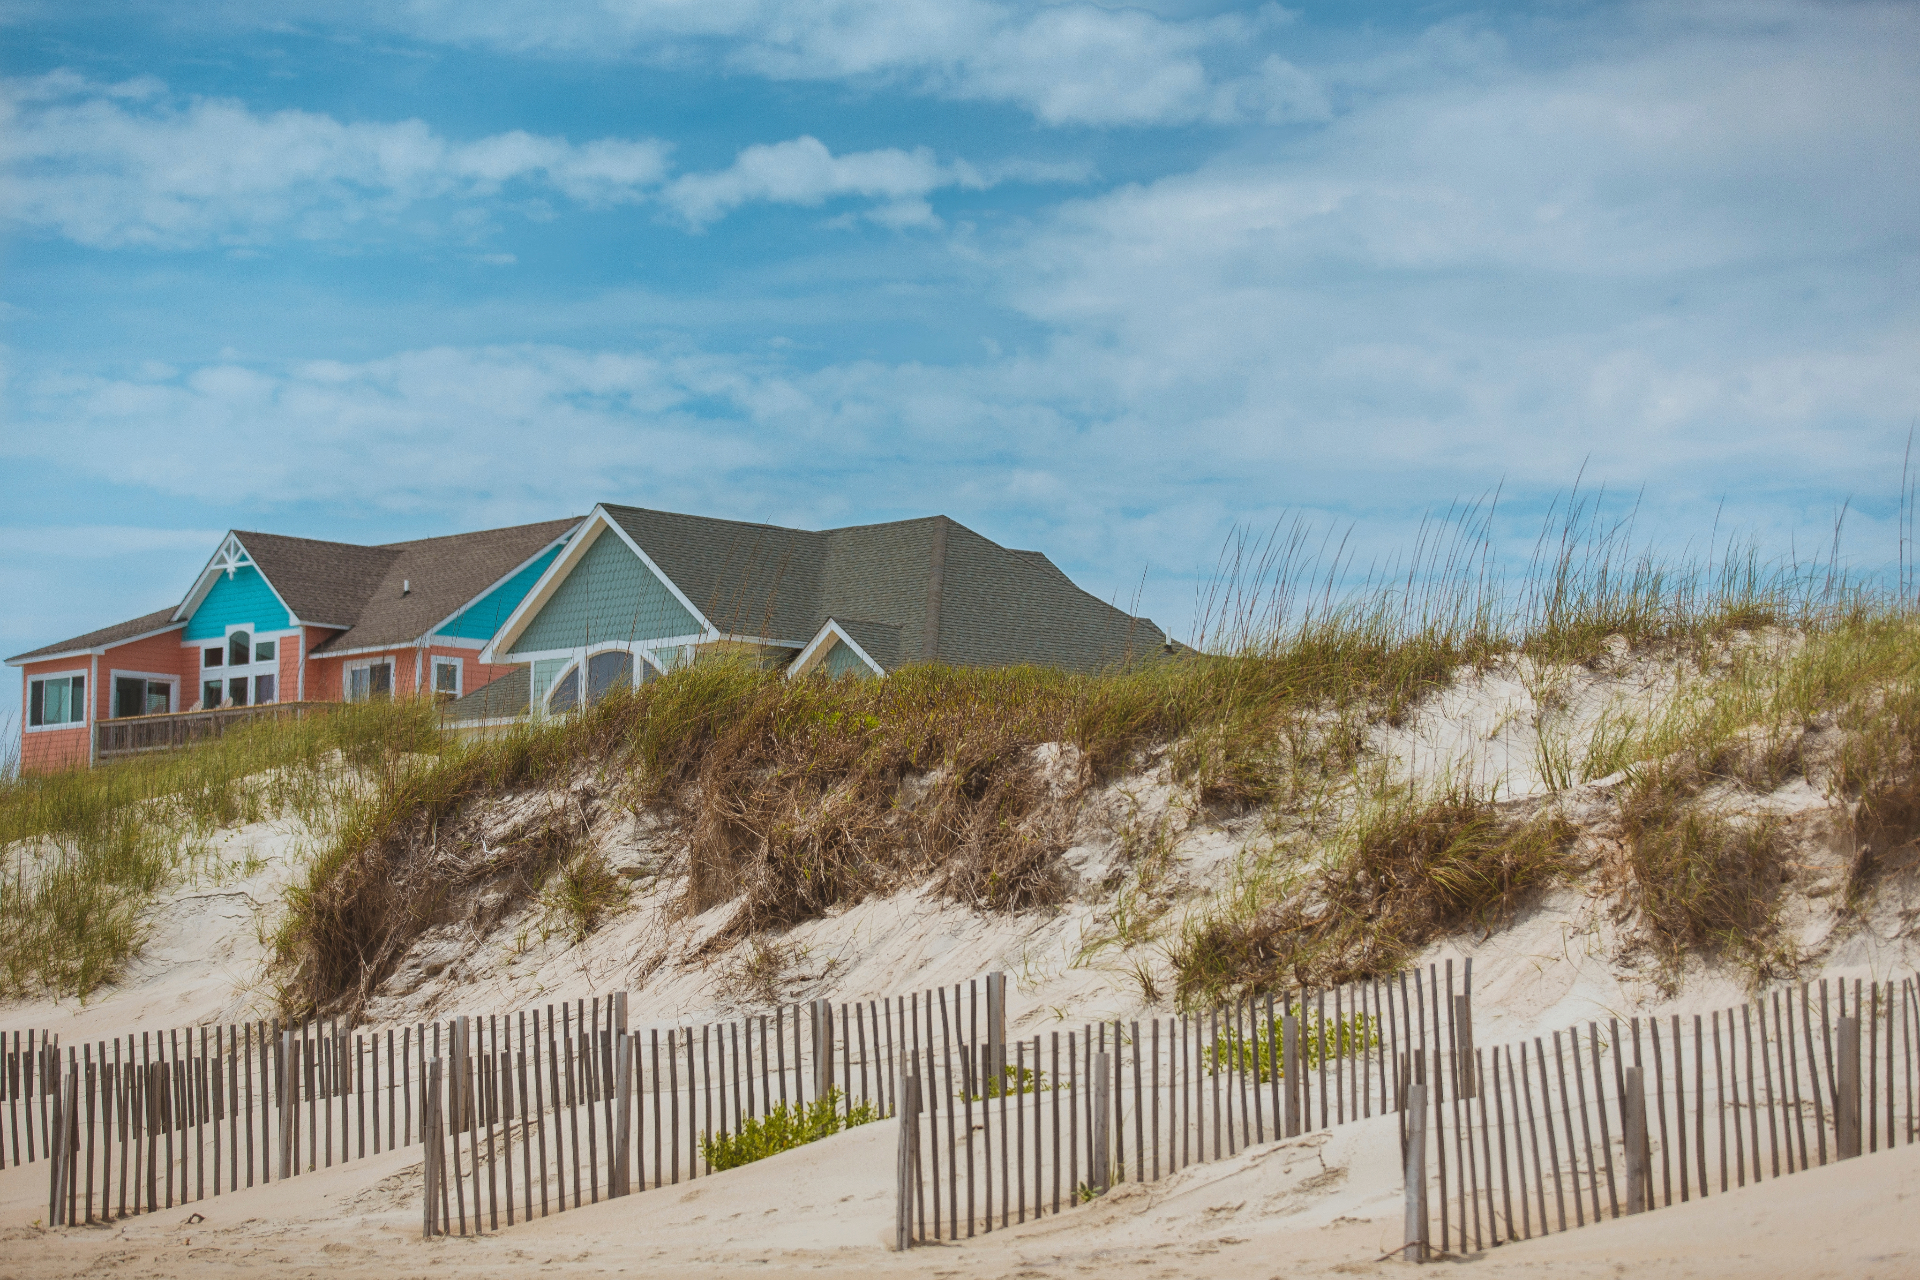 Big bright colorful oceanfront beach houses Outer Banks, North Carolina. Sand dunes, beach grass and wooden fence in the foreground, and clear blue sky